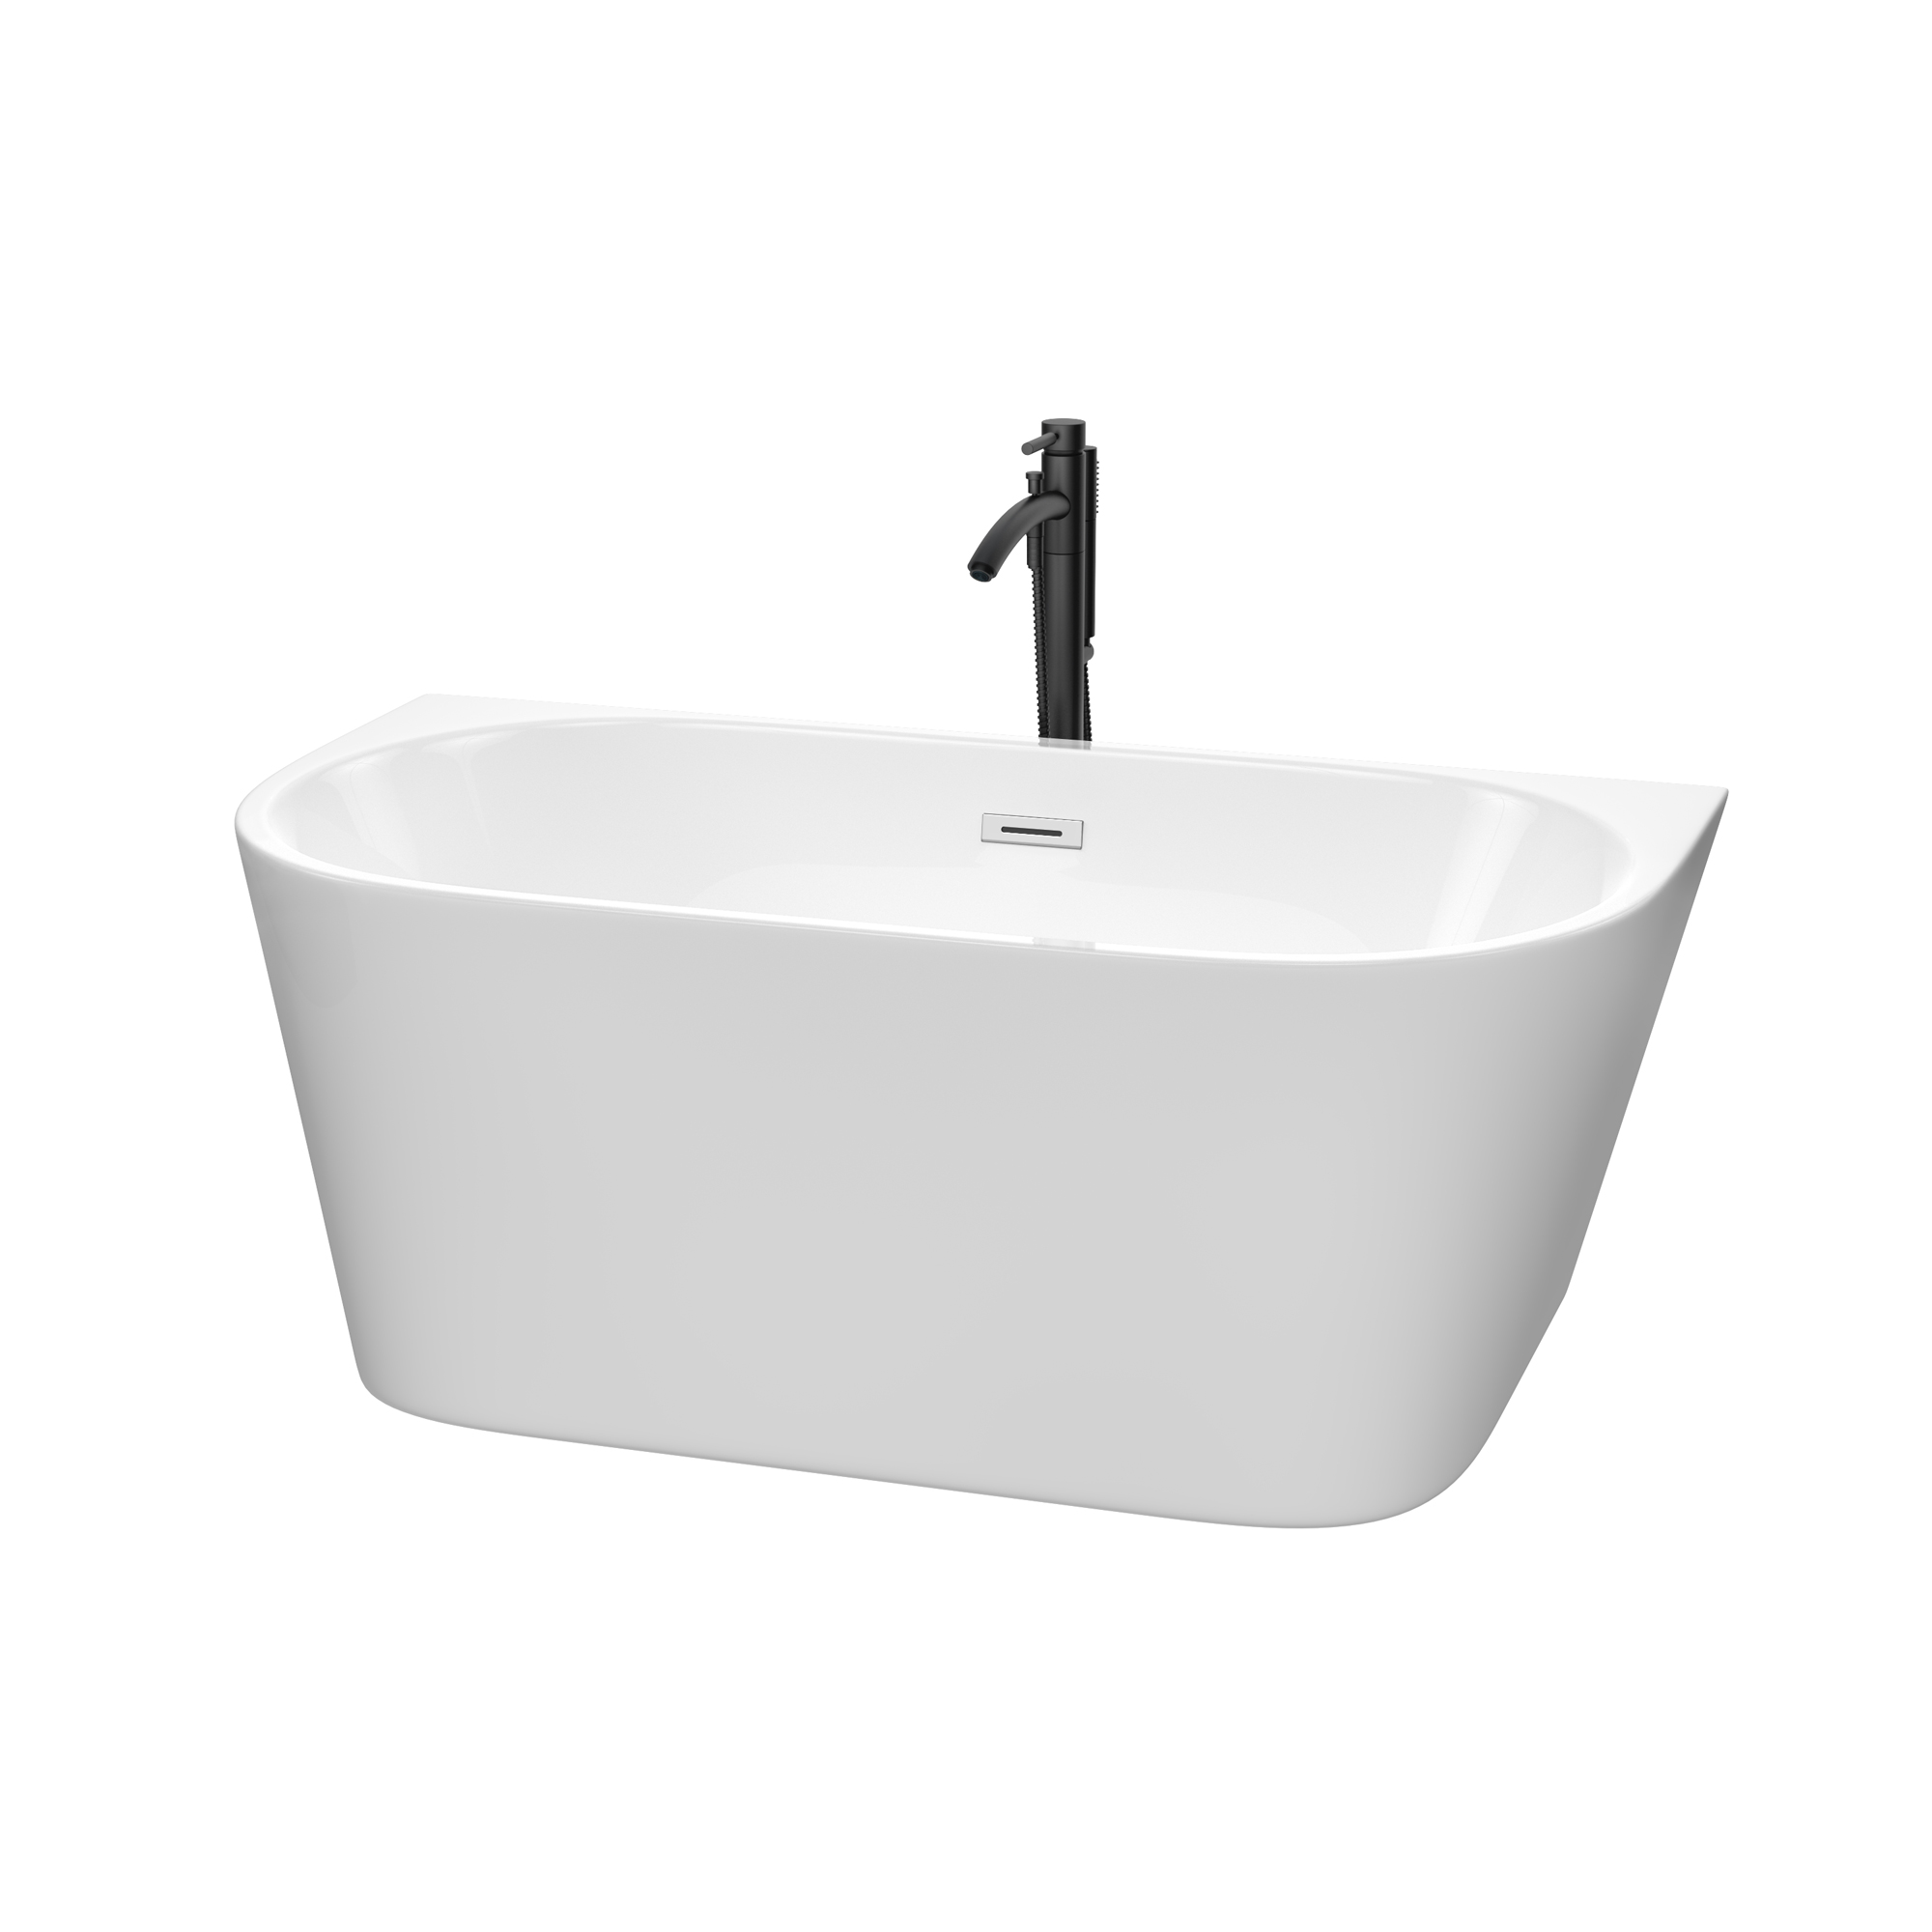 59" Freestanding Bathtub in White with Floor Mounted Faucet in Matte Black and Polished Chrome Trim